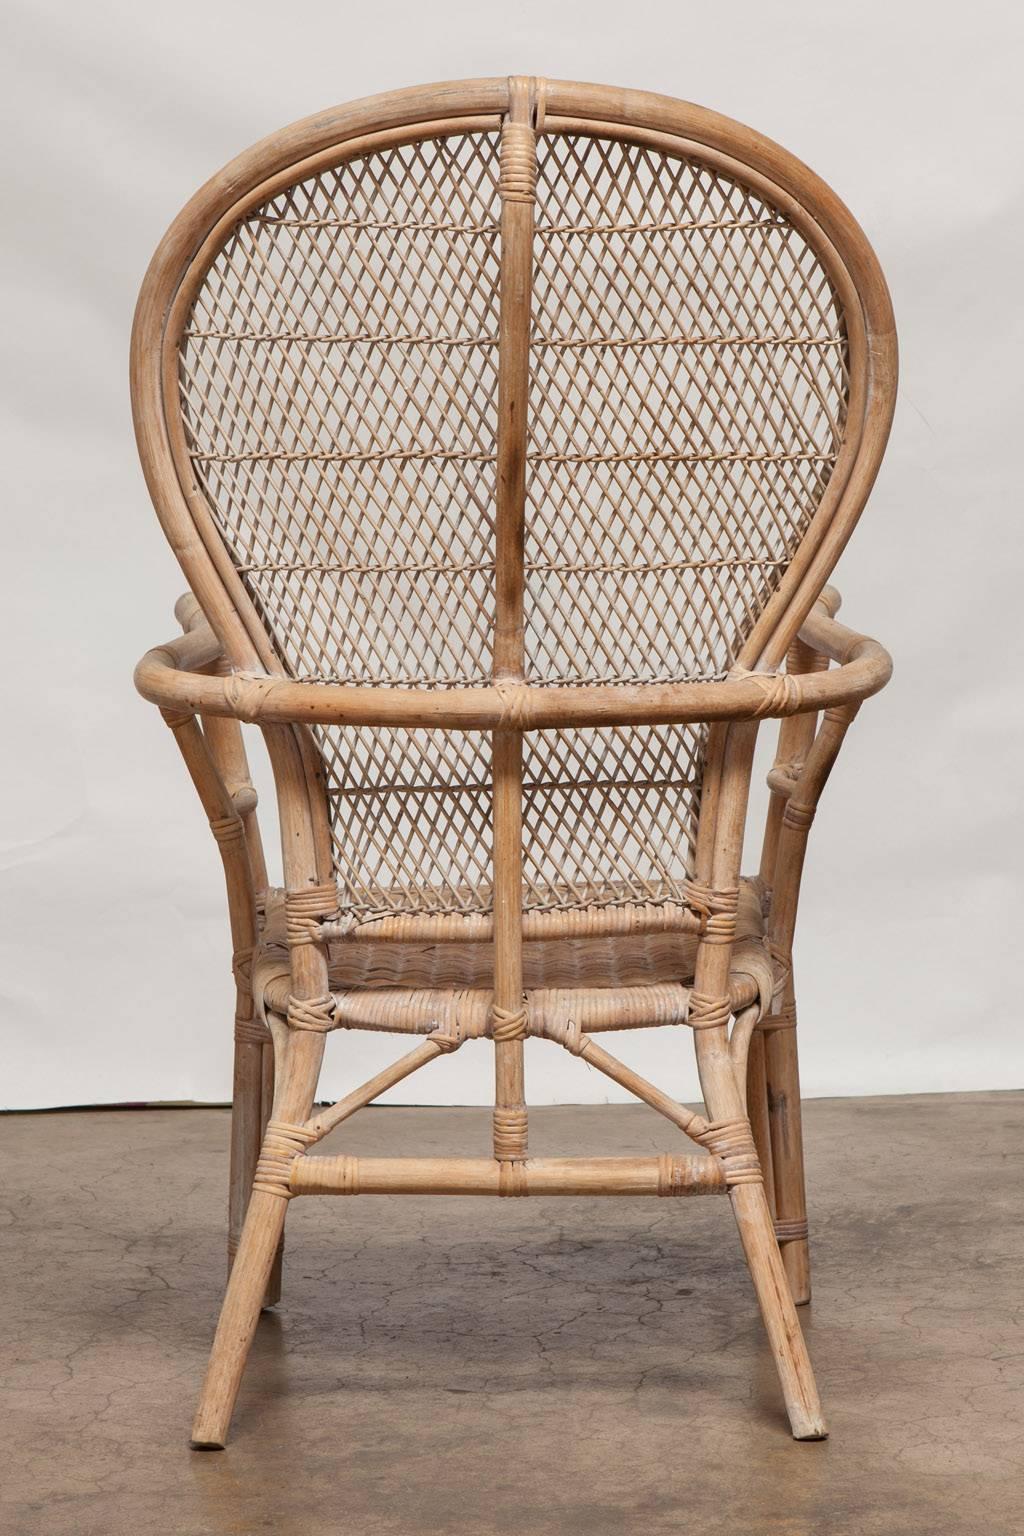 20th Century Pair of Rattan Fan-Back Peacock Chairs